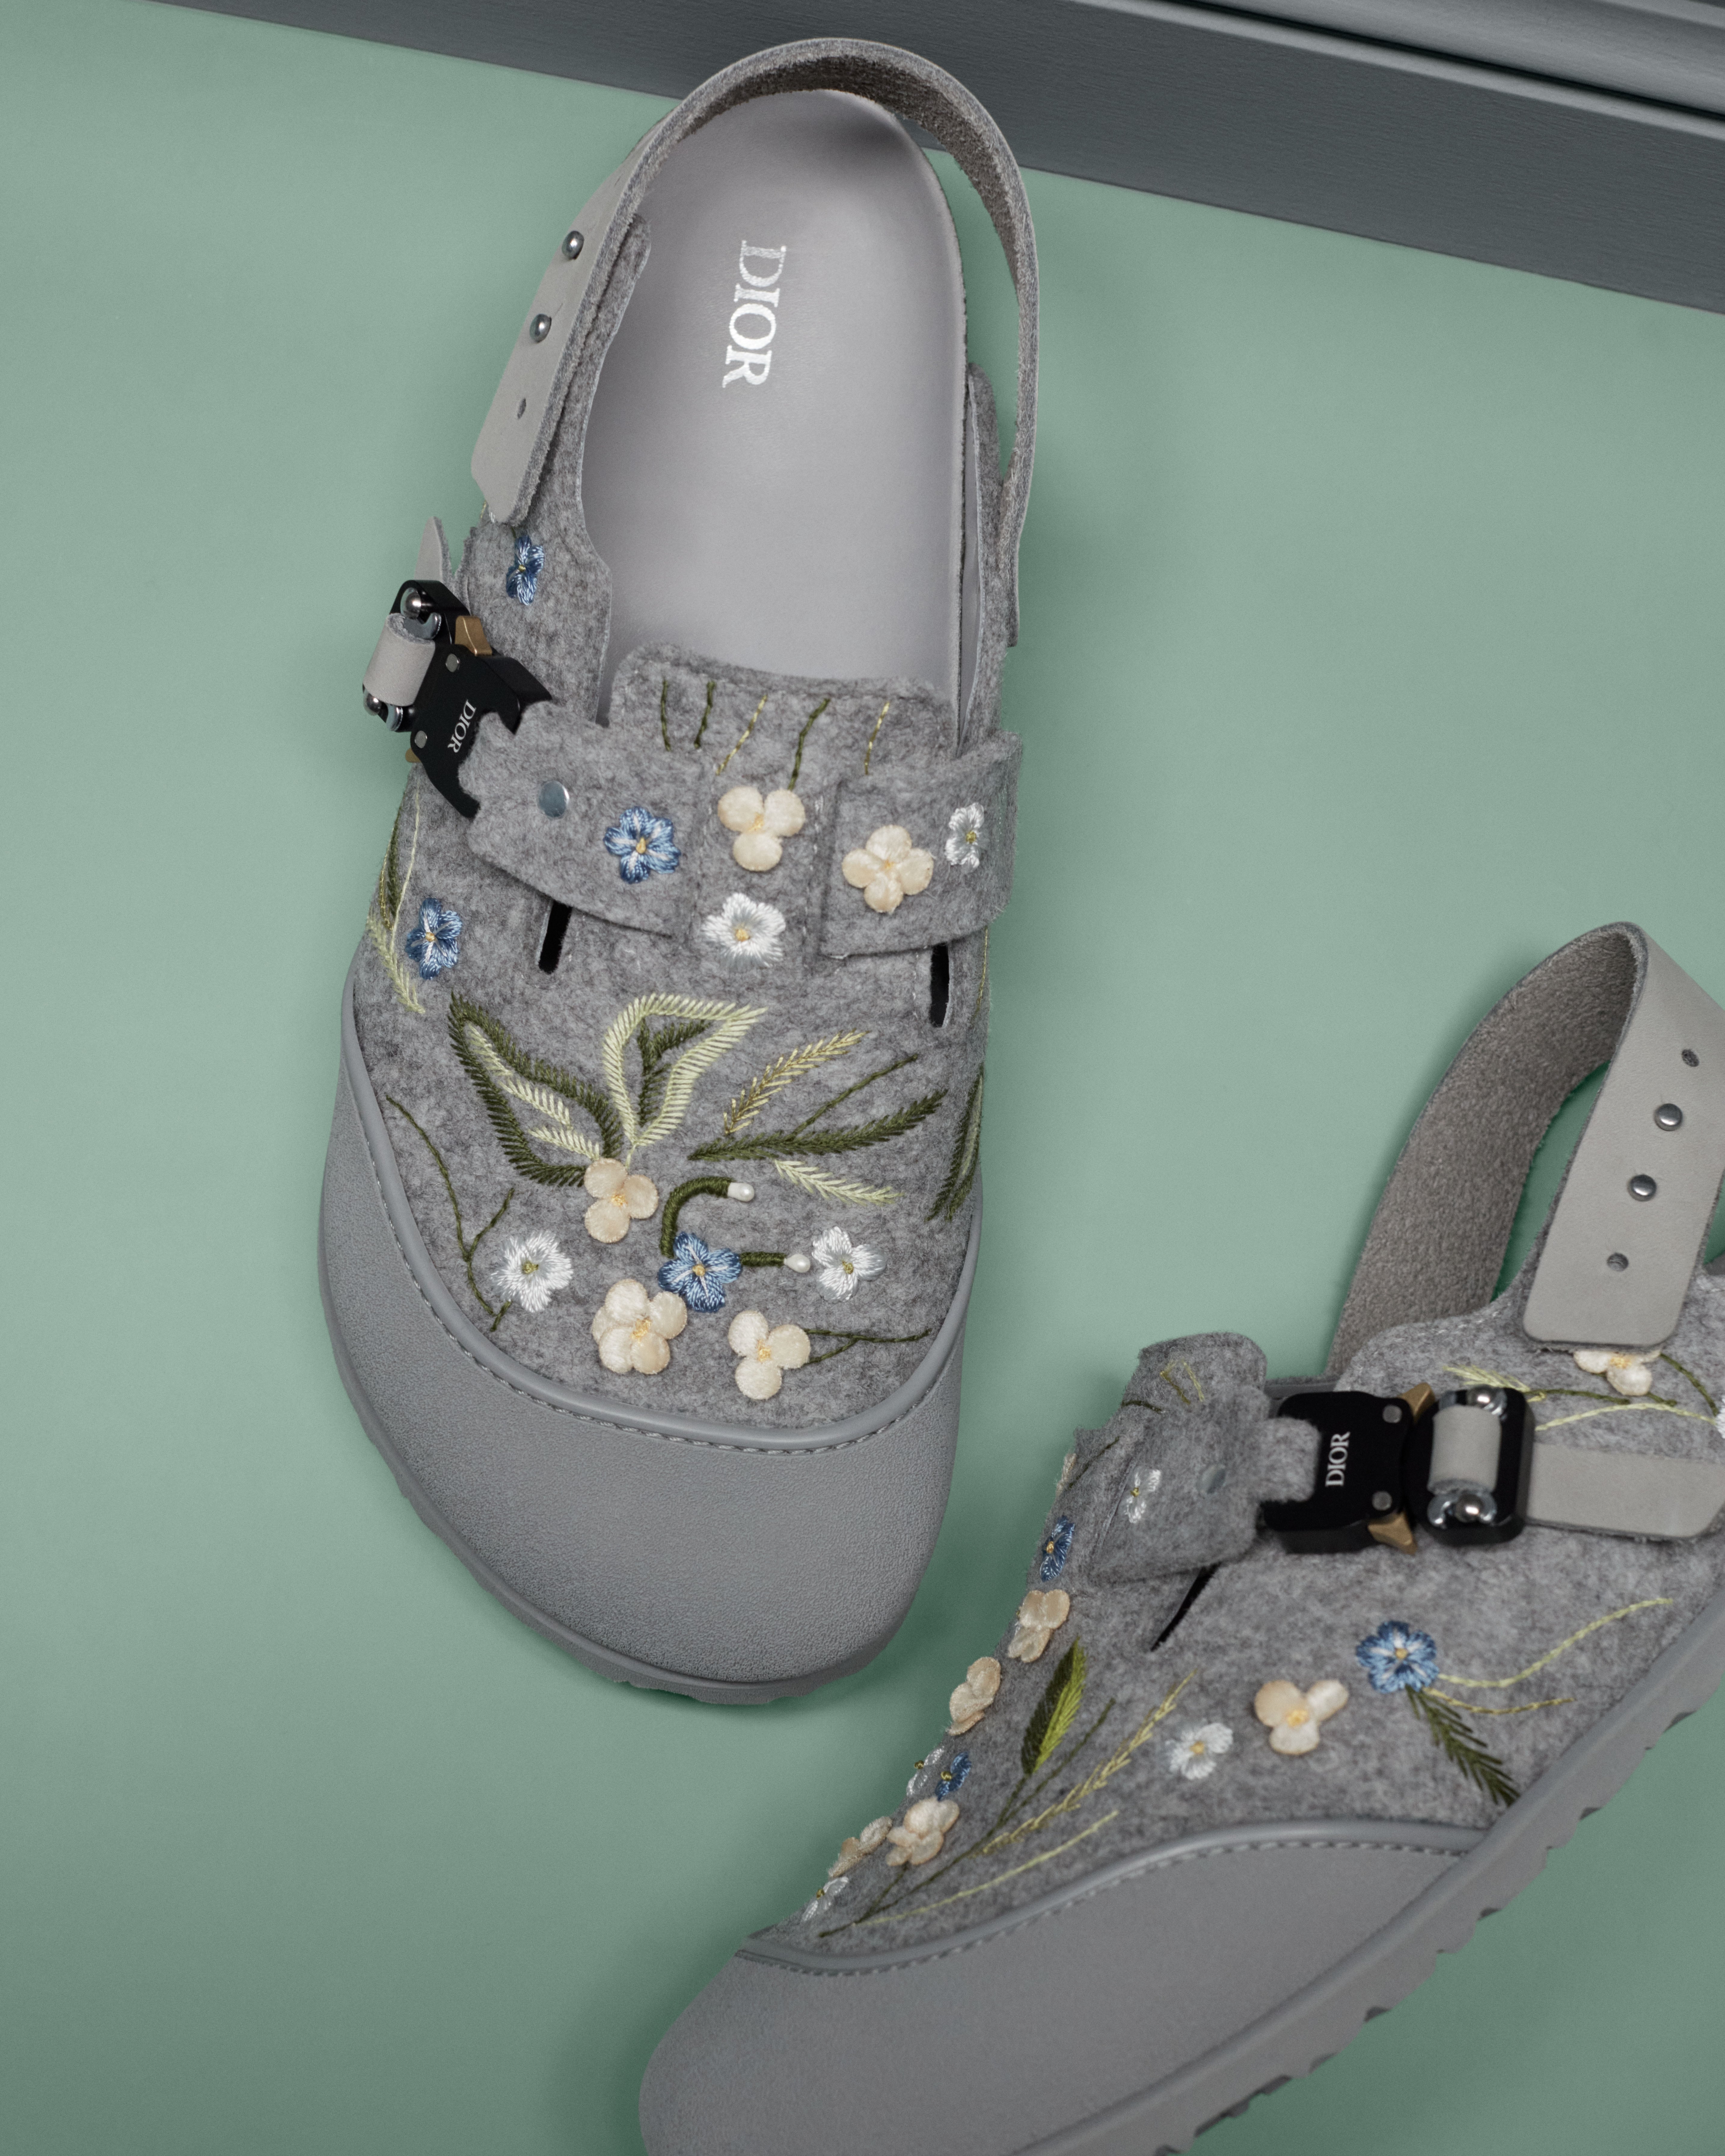 Dior Launches a New Collaboration With Birkenstock